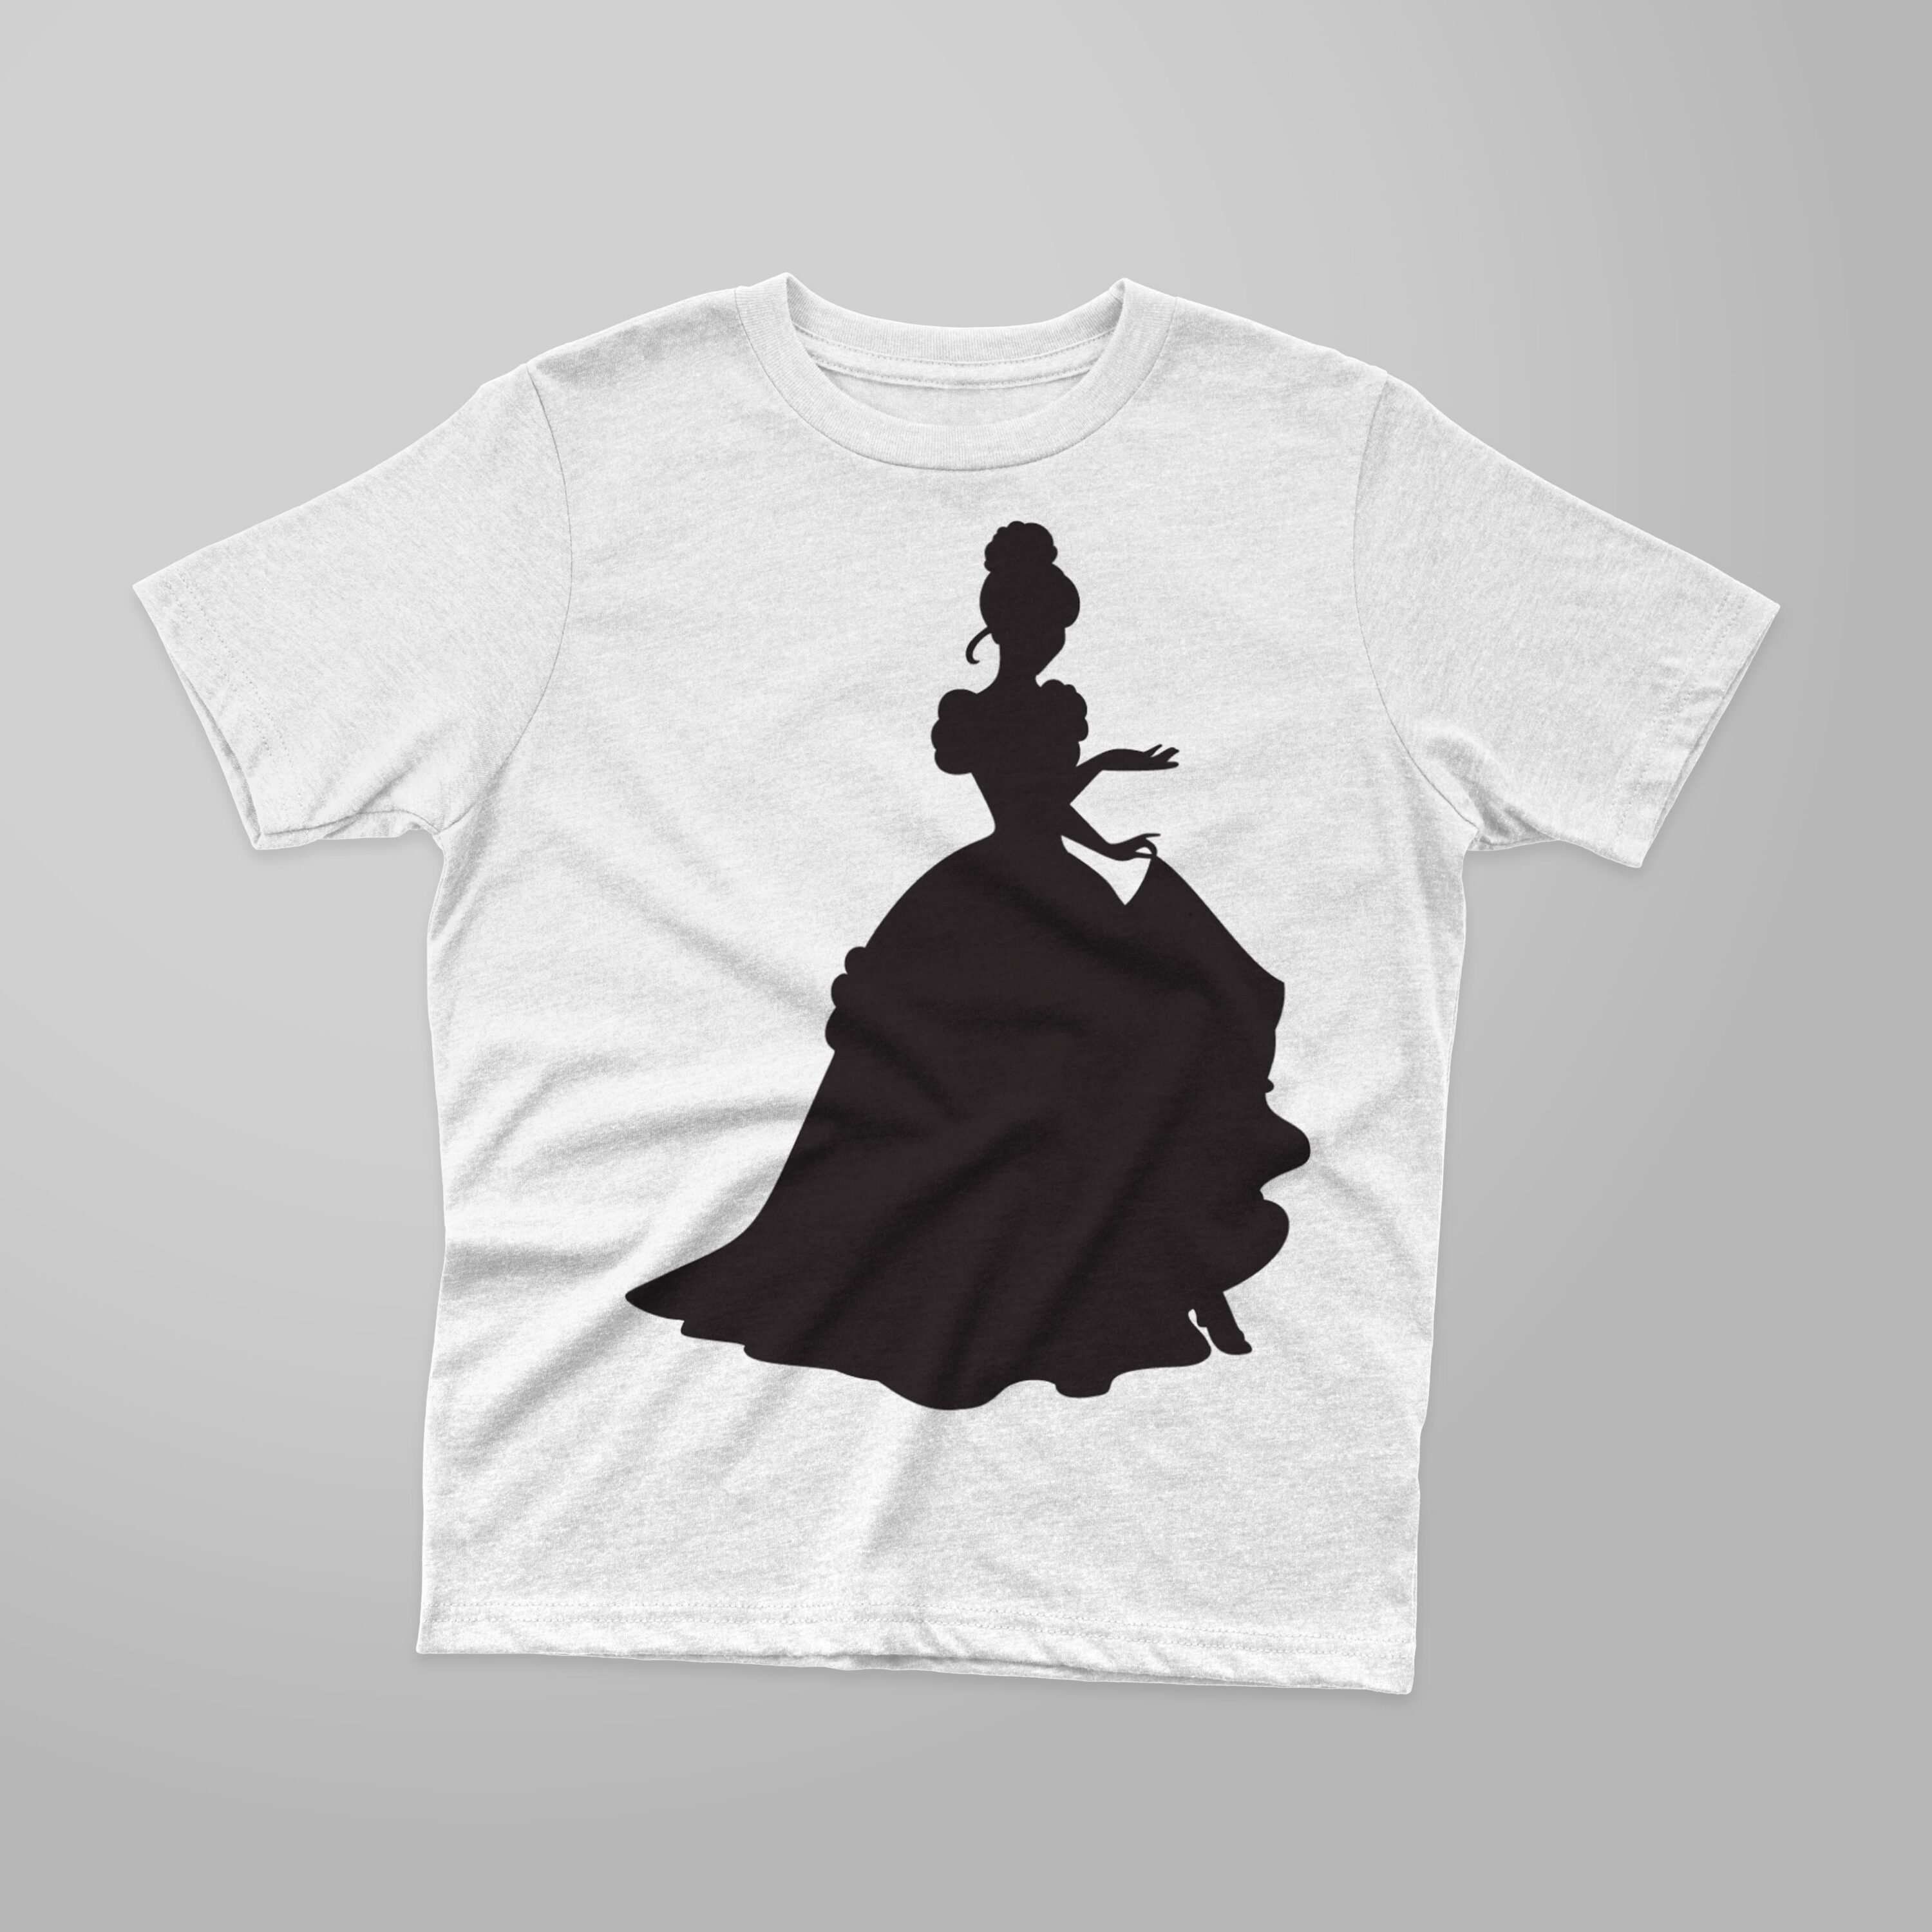 Image of a white t-shirt with a wonderful print of the Cinderella silhouette.